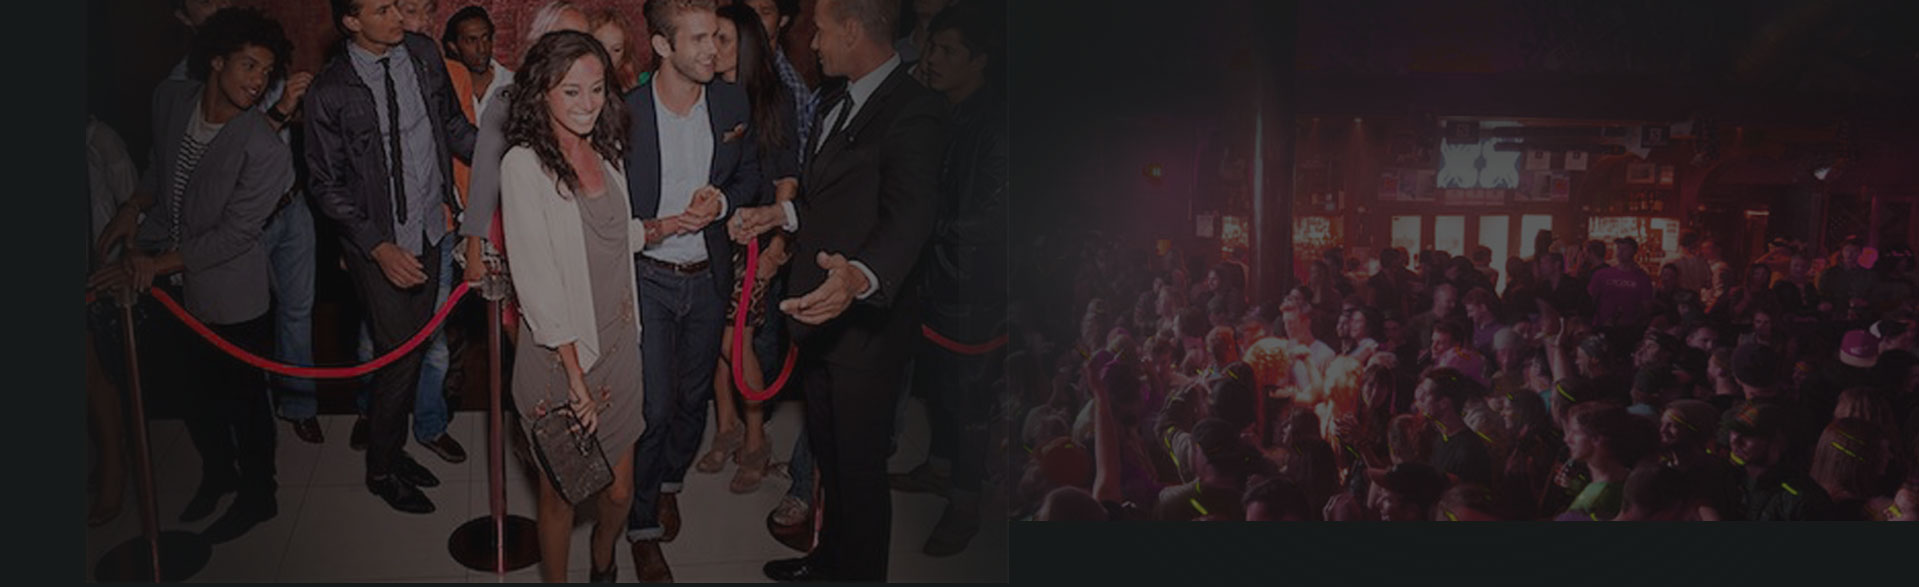 Las Vegas VIP Party Packages and VIP Party Services provided by Entourage Entertainment